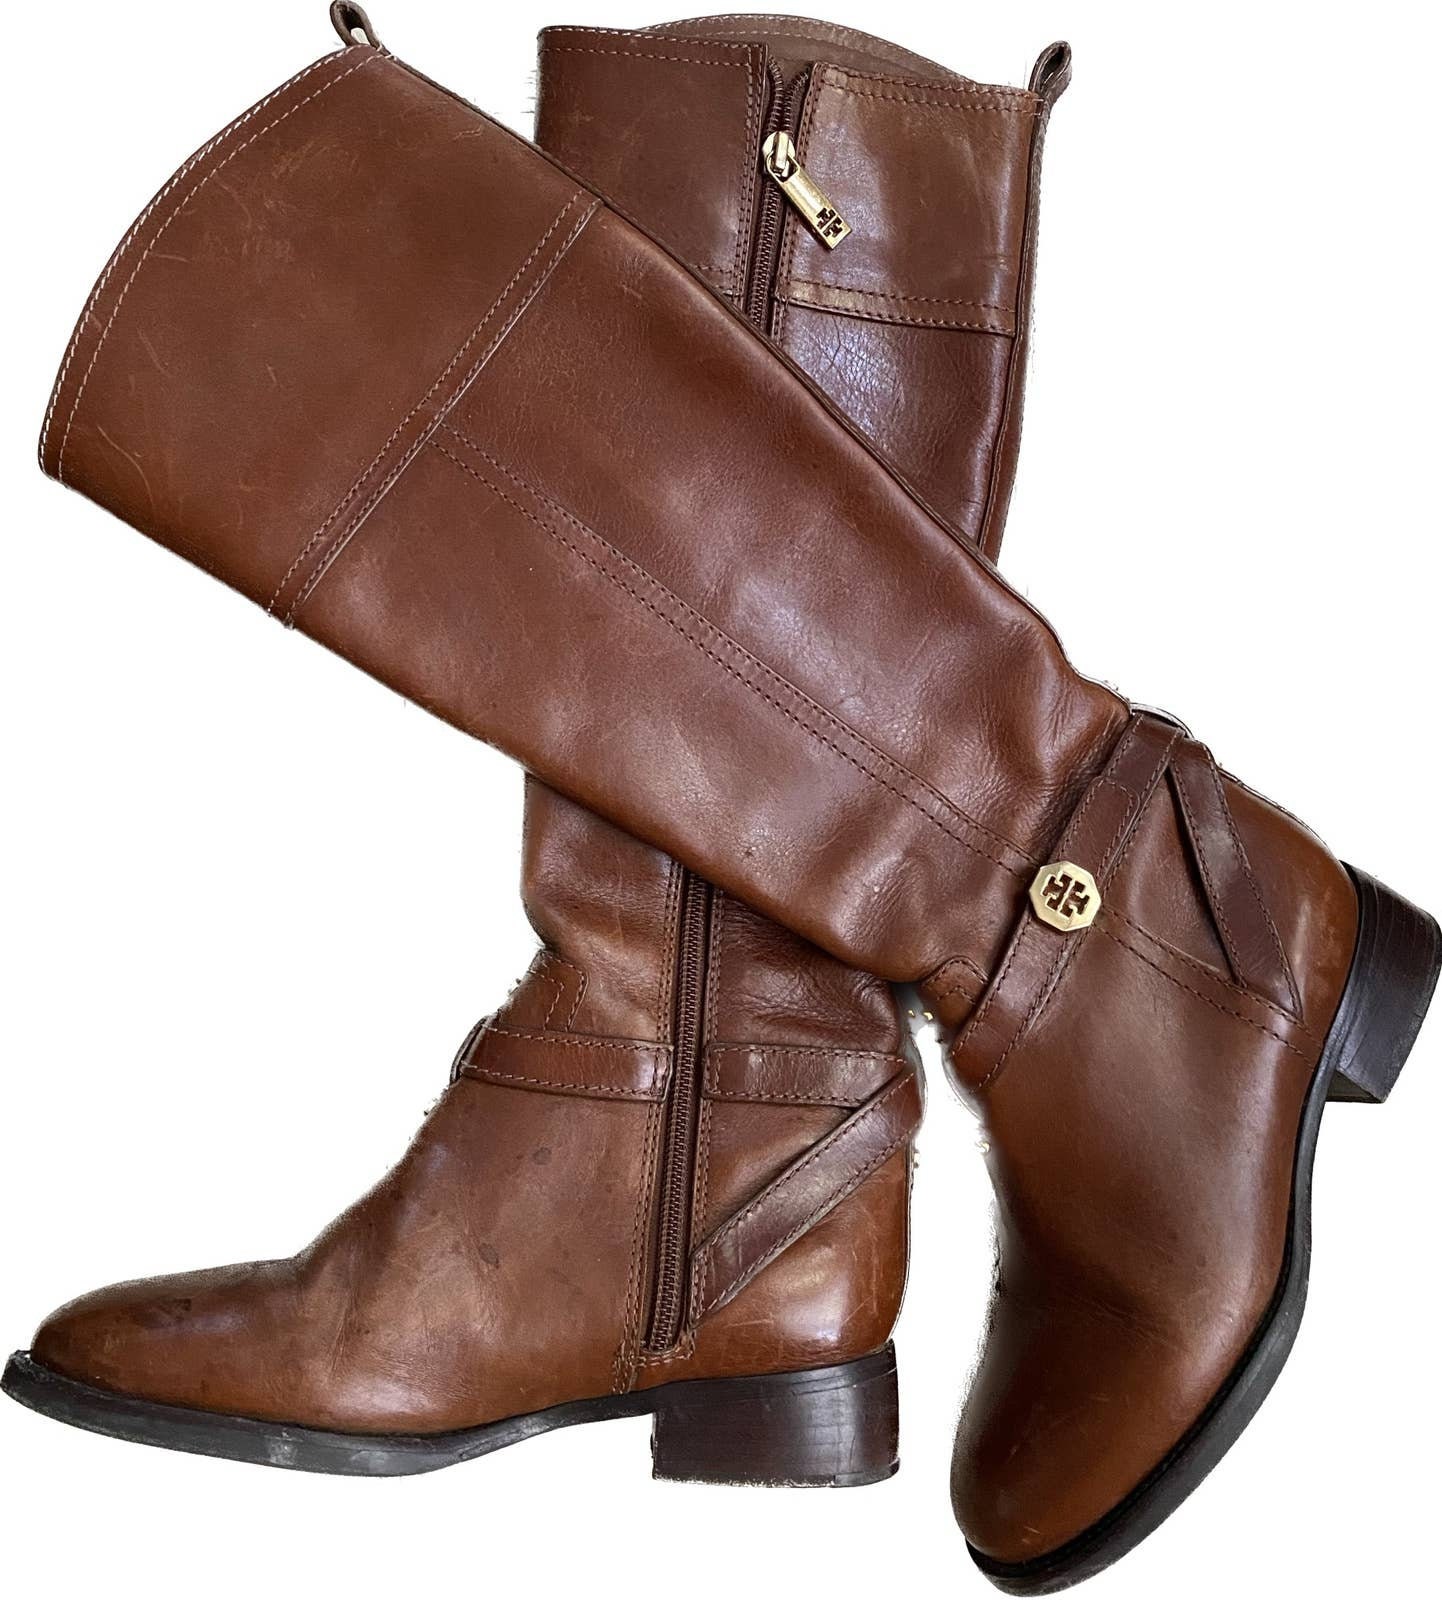 Chanel Logo Brown Leather Knee High Boots – Vintage by Misty